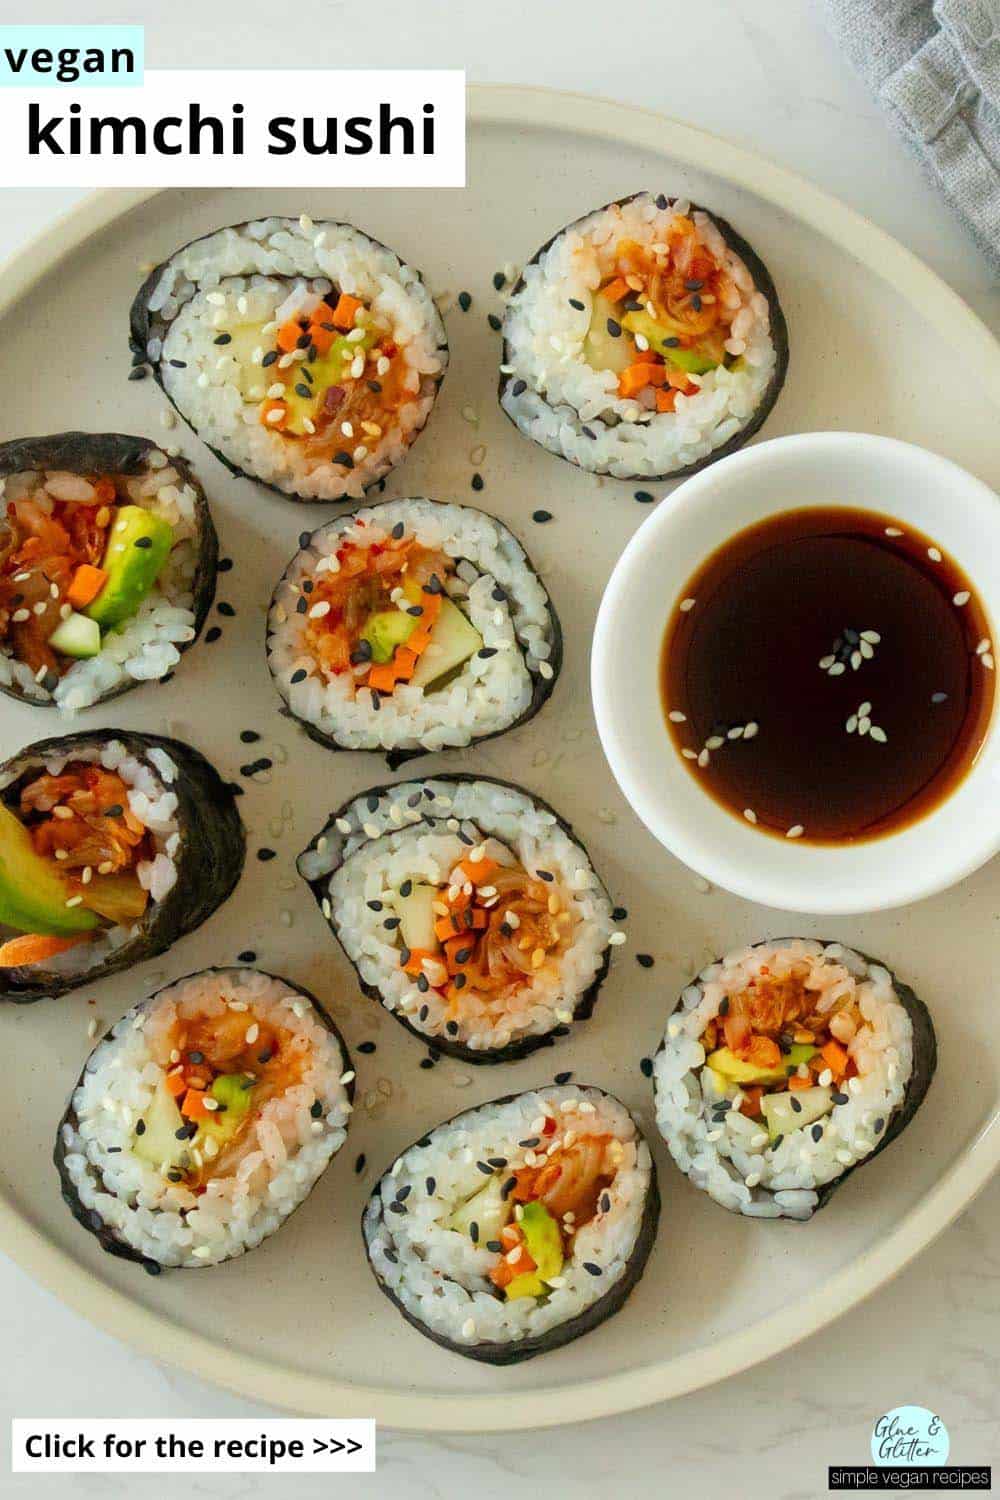 plate of kimchi sushi with sesame seeds and a side of soy sauce, text overlay